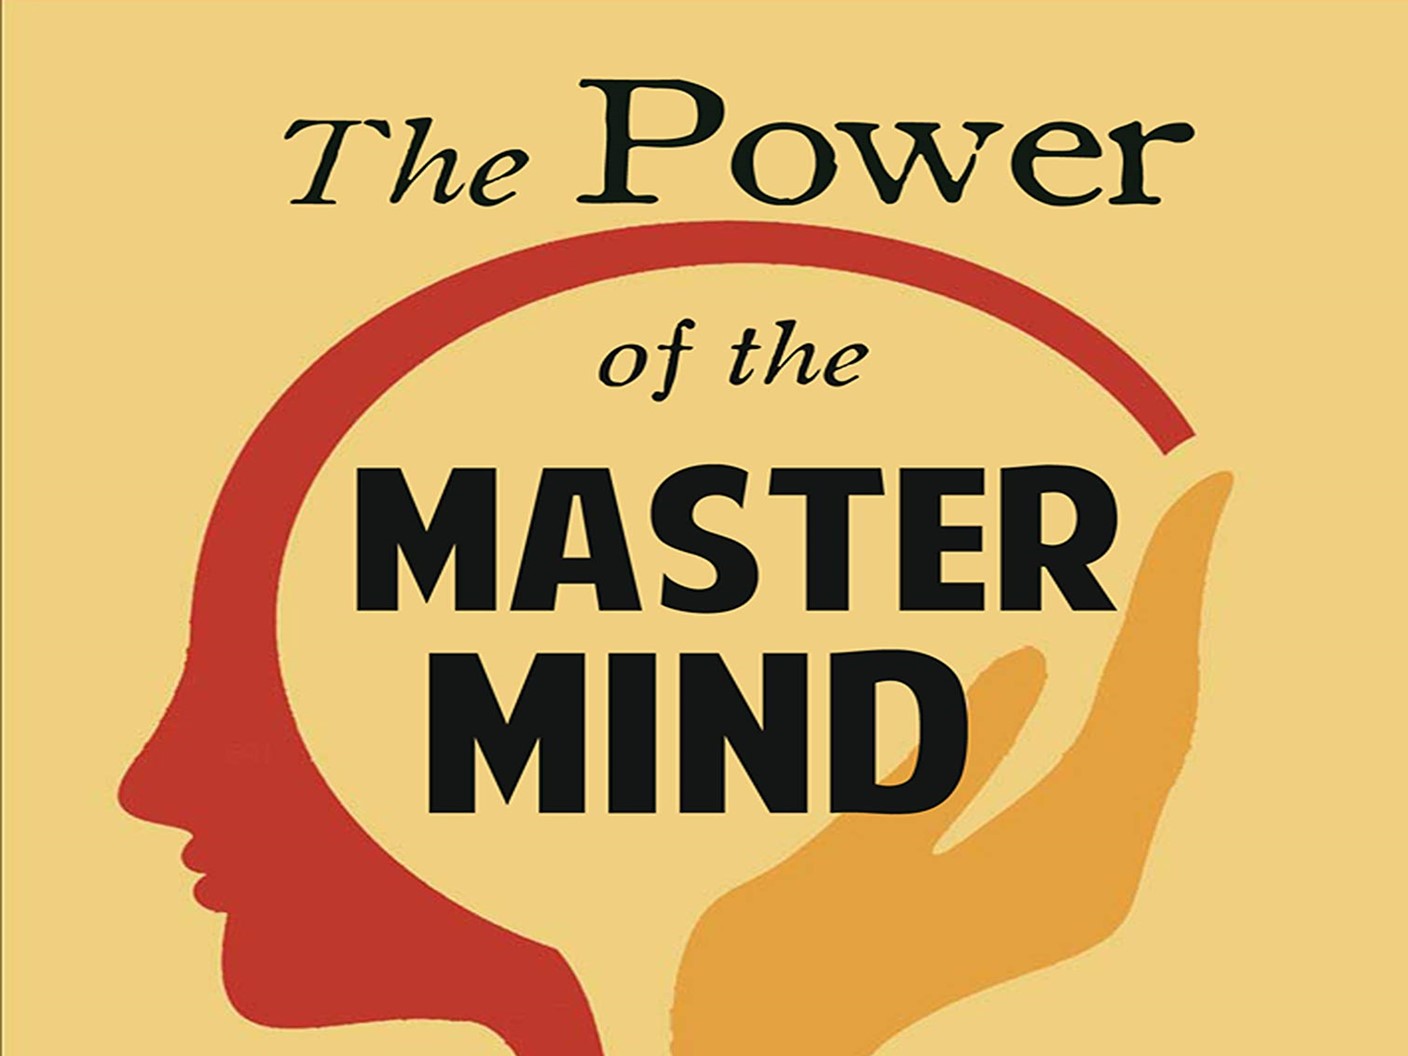 The Power of the Master Mind